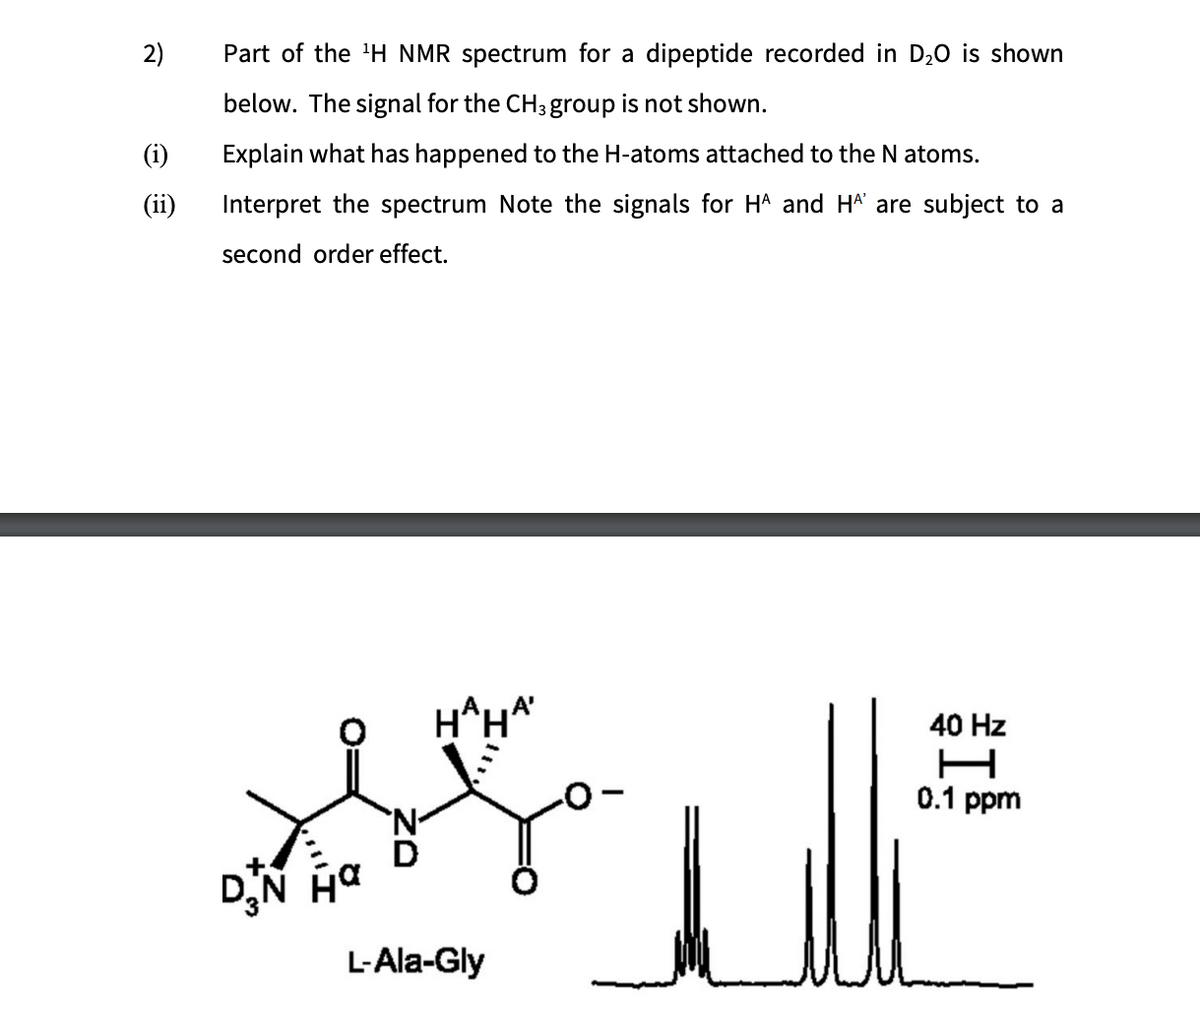 2)
Part of the 'H NMR spectrum for a dipeptide recorded in D₂O is shown
below. The signal for the CH 3 group is not shown.
(i) Explain what has happened to the H-atoms attached to the N atoms.
(ii) Interpret the spectrum Note the signals for HA and HA are subject to a
second order effect.
'N-
HAHA'
40 Hz
H
0.1 ppm
L-Ala-Gly